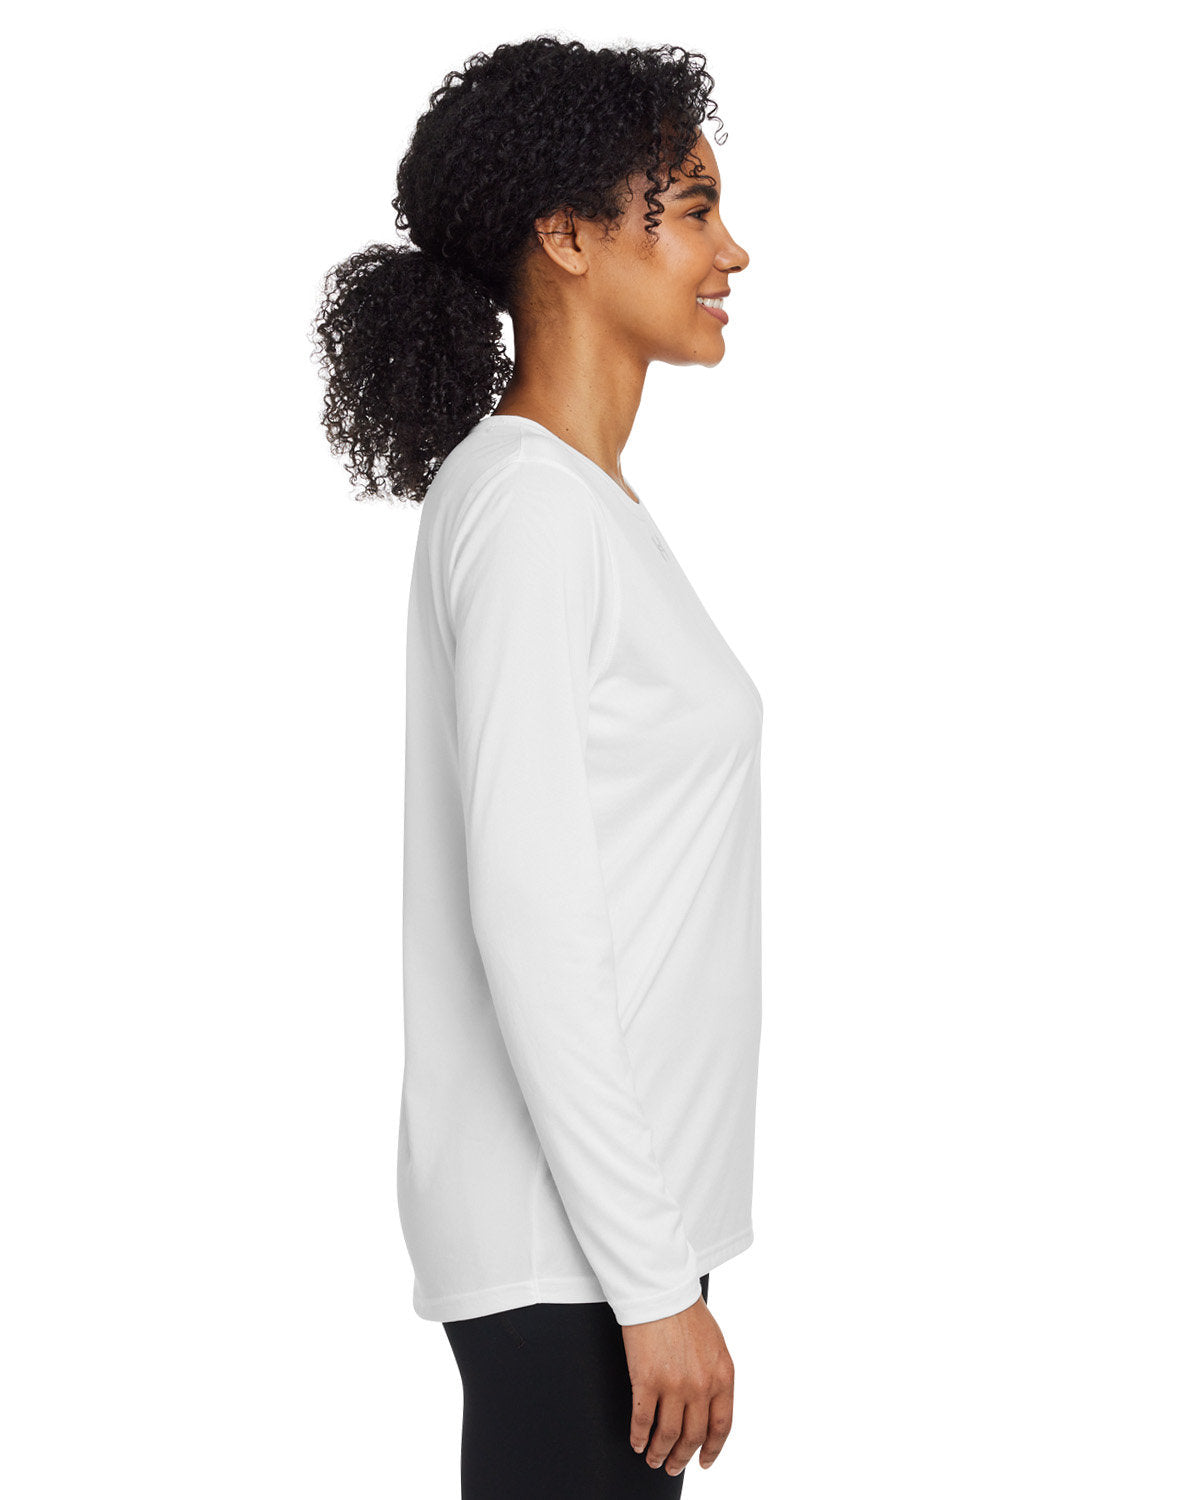 Under Armour Ladies Tech Long-Sleeve Customized T-Shirts, White